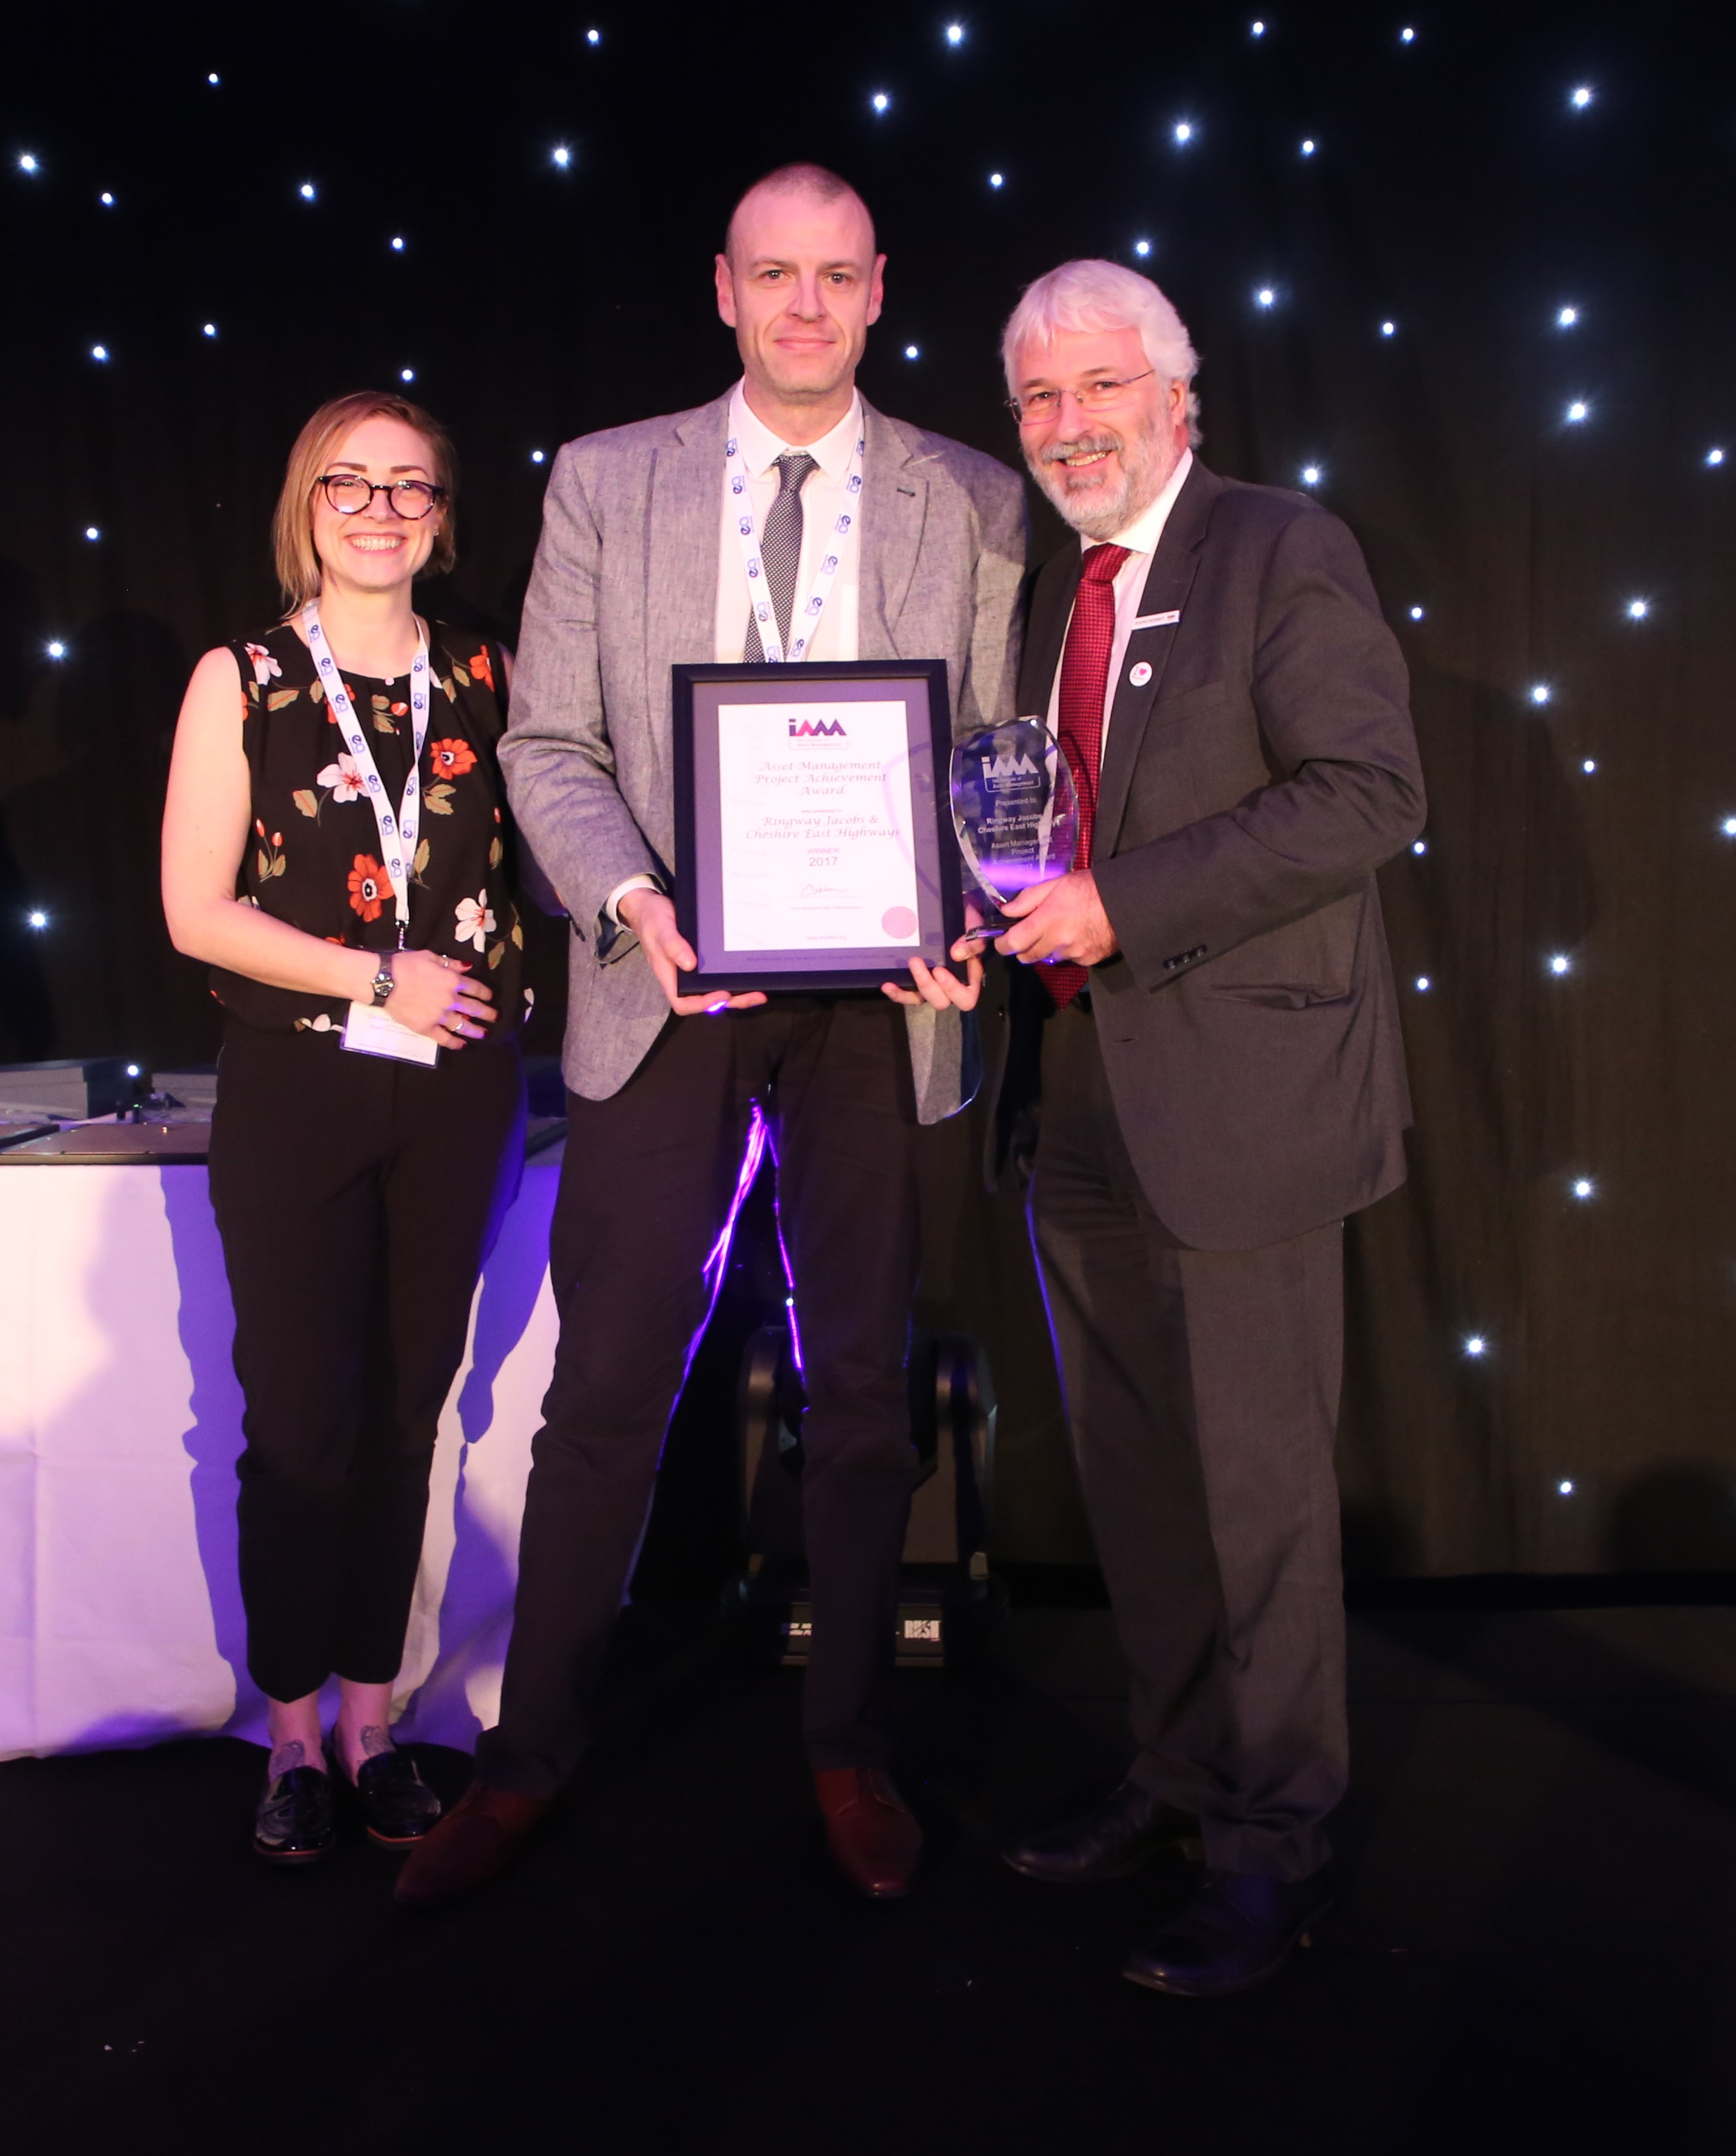 Cheshire East Highways wins the Institute of Asset Management Project Achievement Award